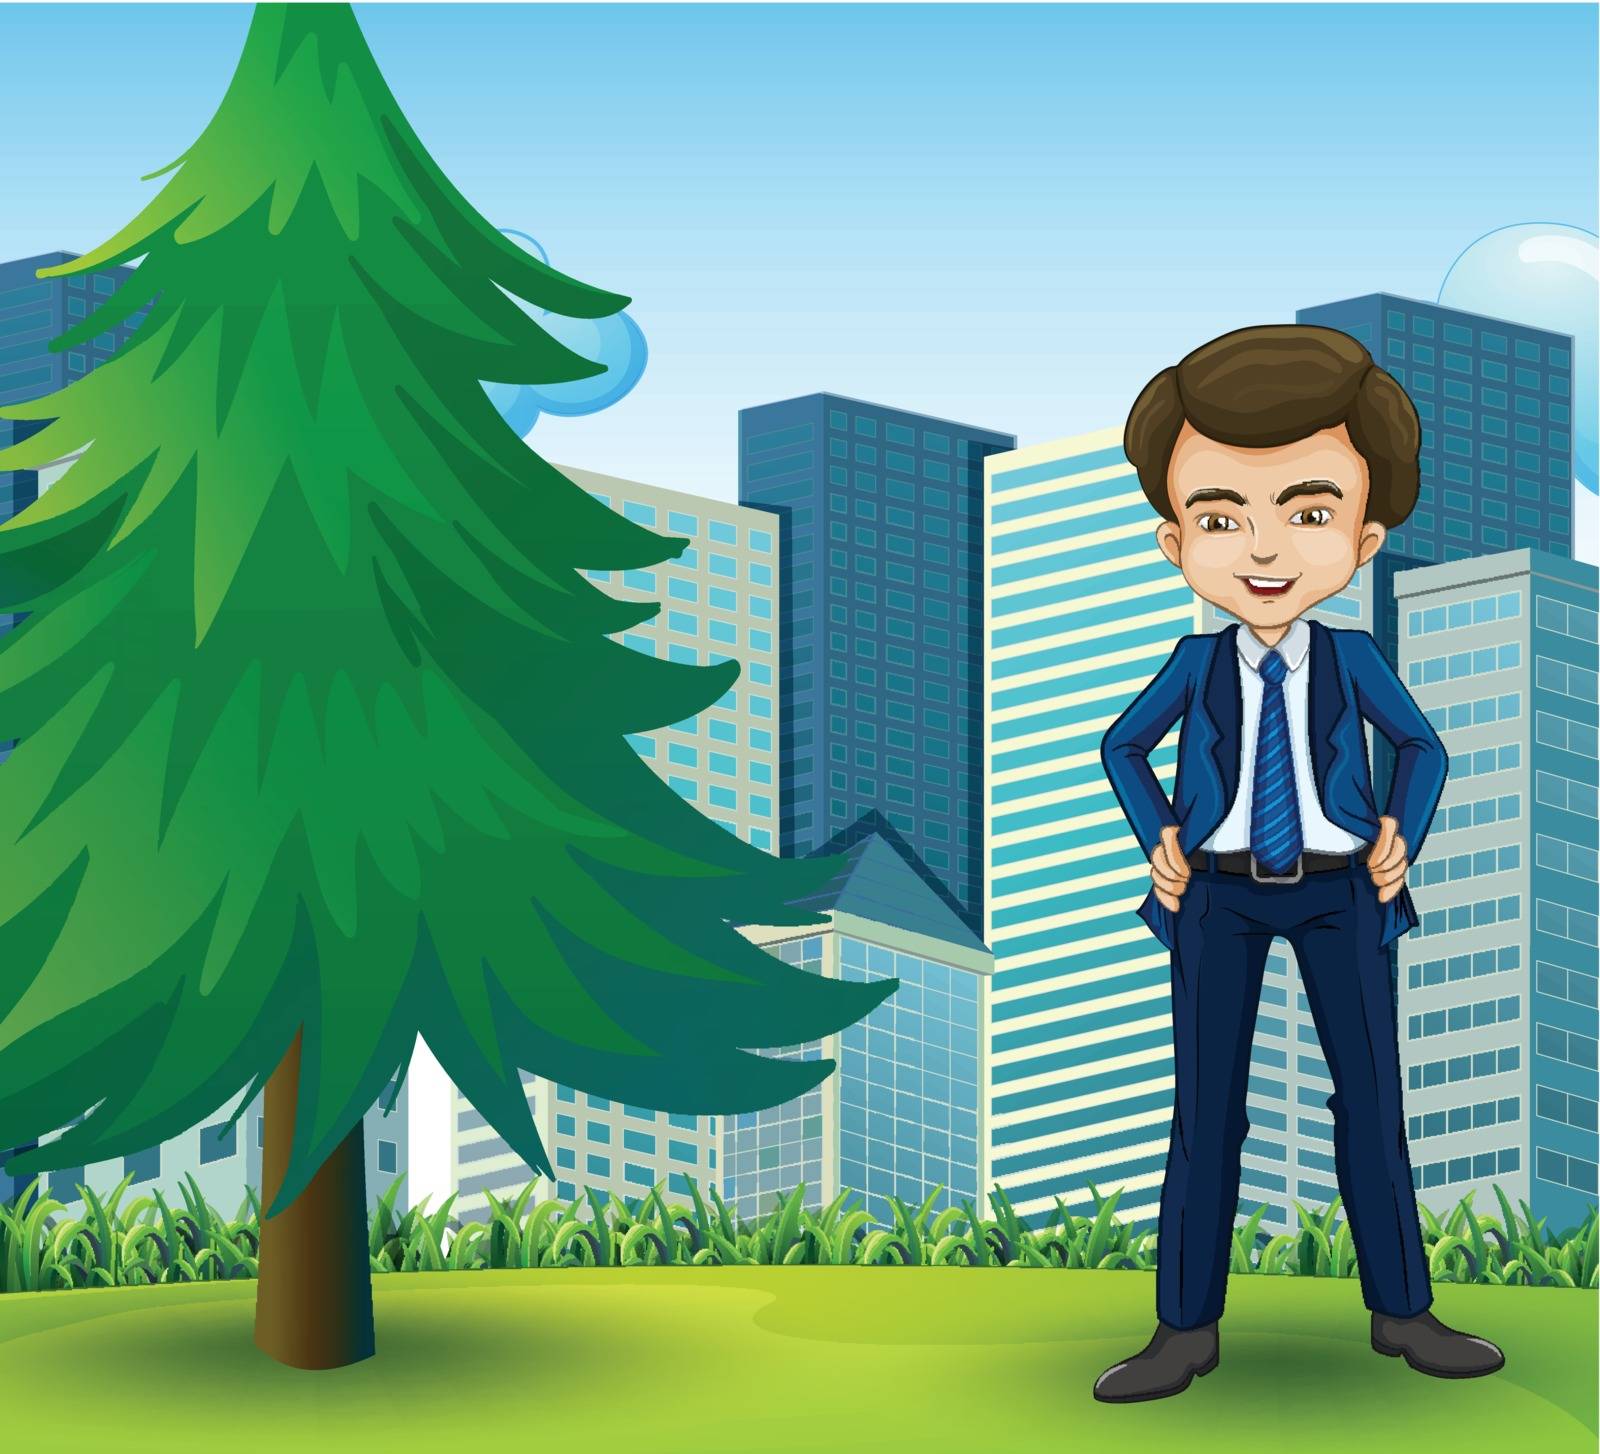 Illustration of a happy businessman standing near the pine tree